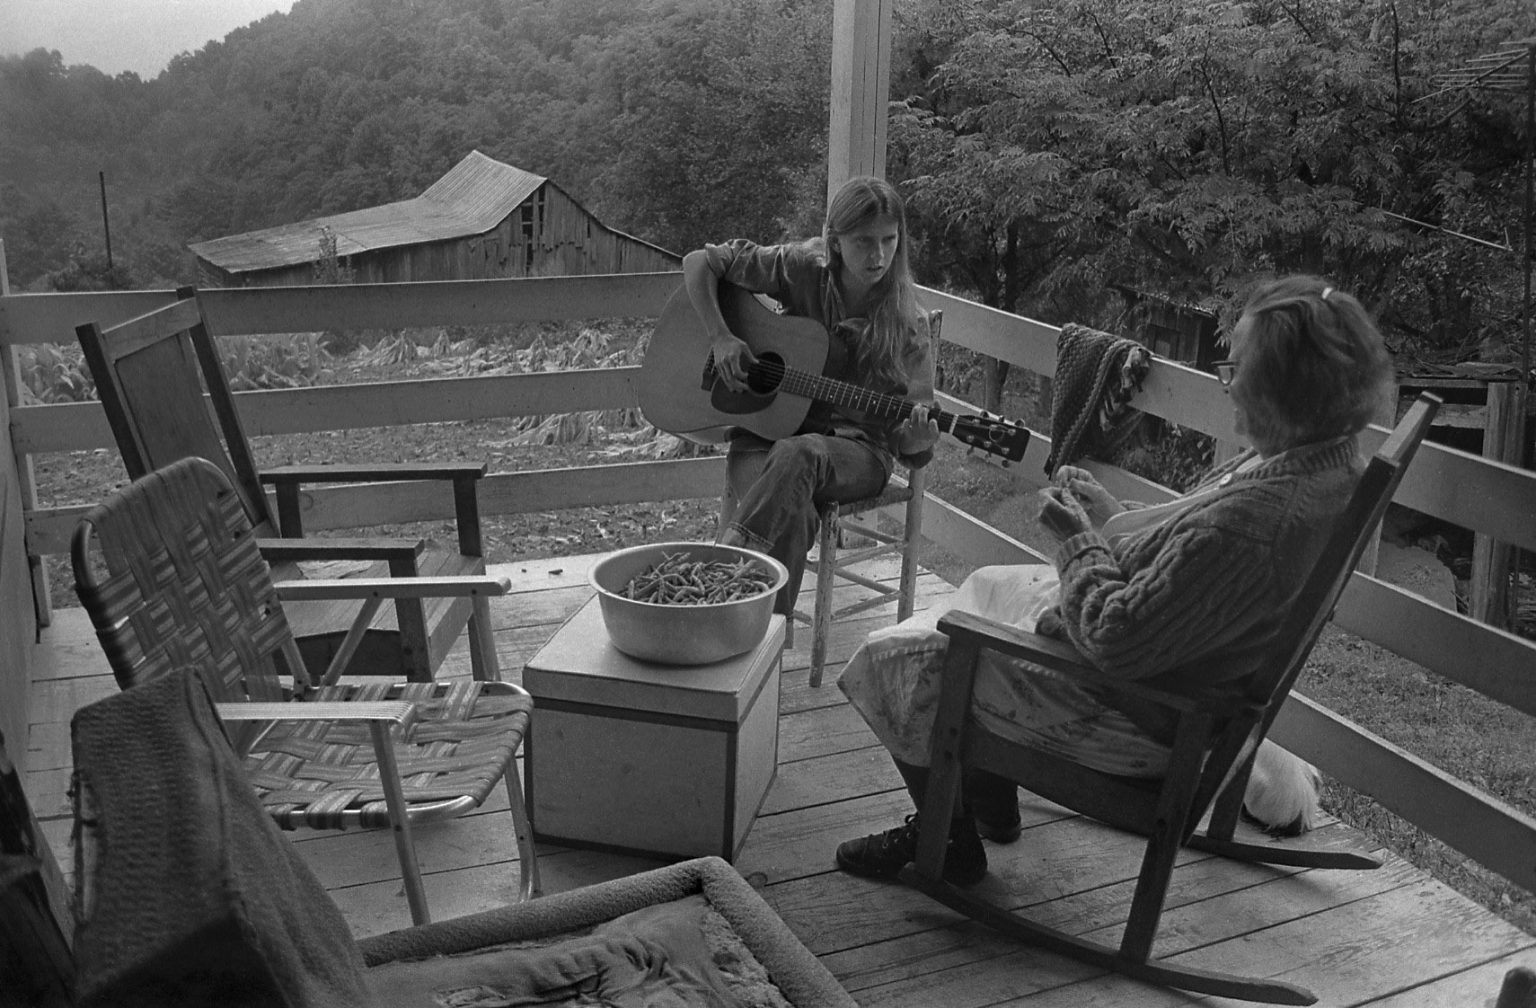 Dellie stringing beans with Nancy Morris, Sodom, Madison County, NC, 1975. (Copyright photograph by Rob Amberg, 2020.)